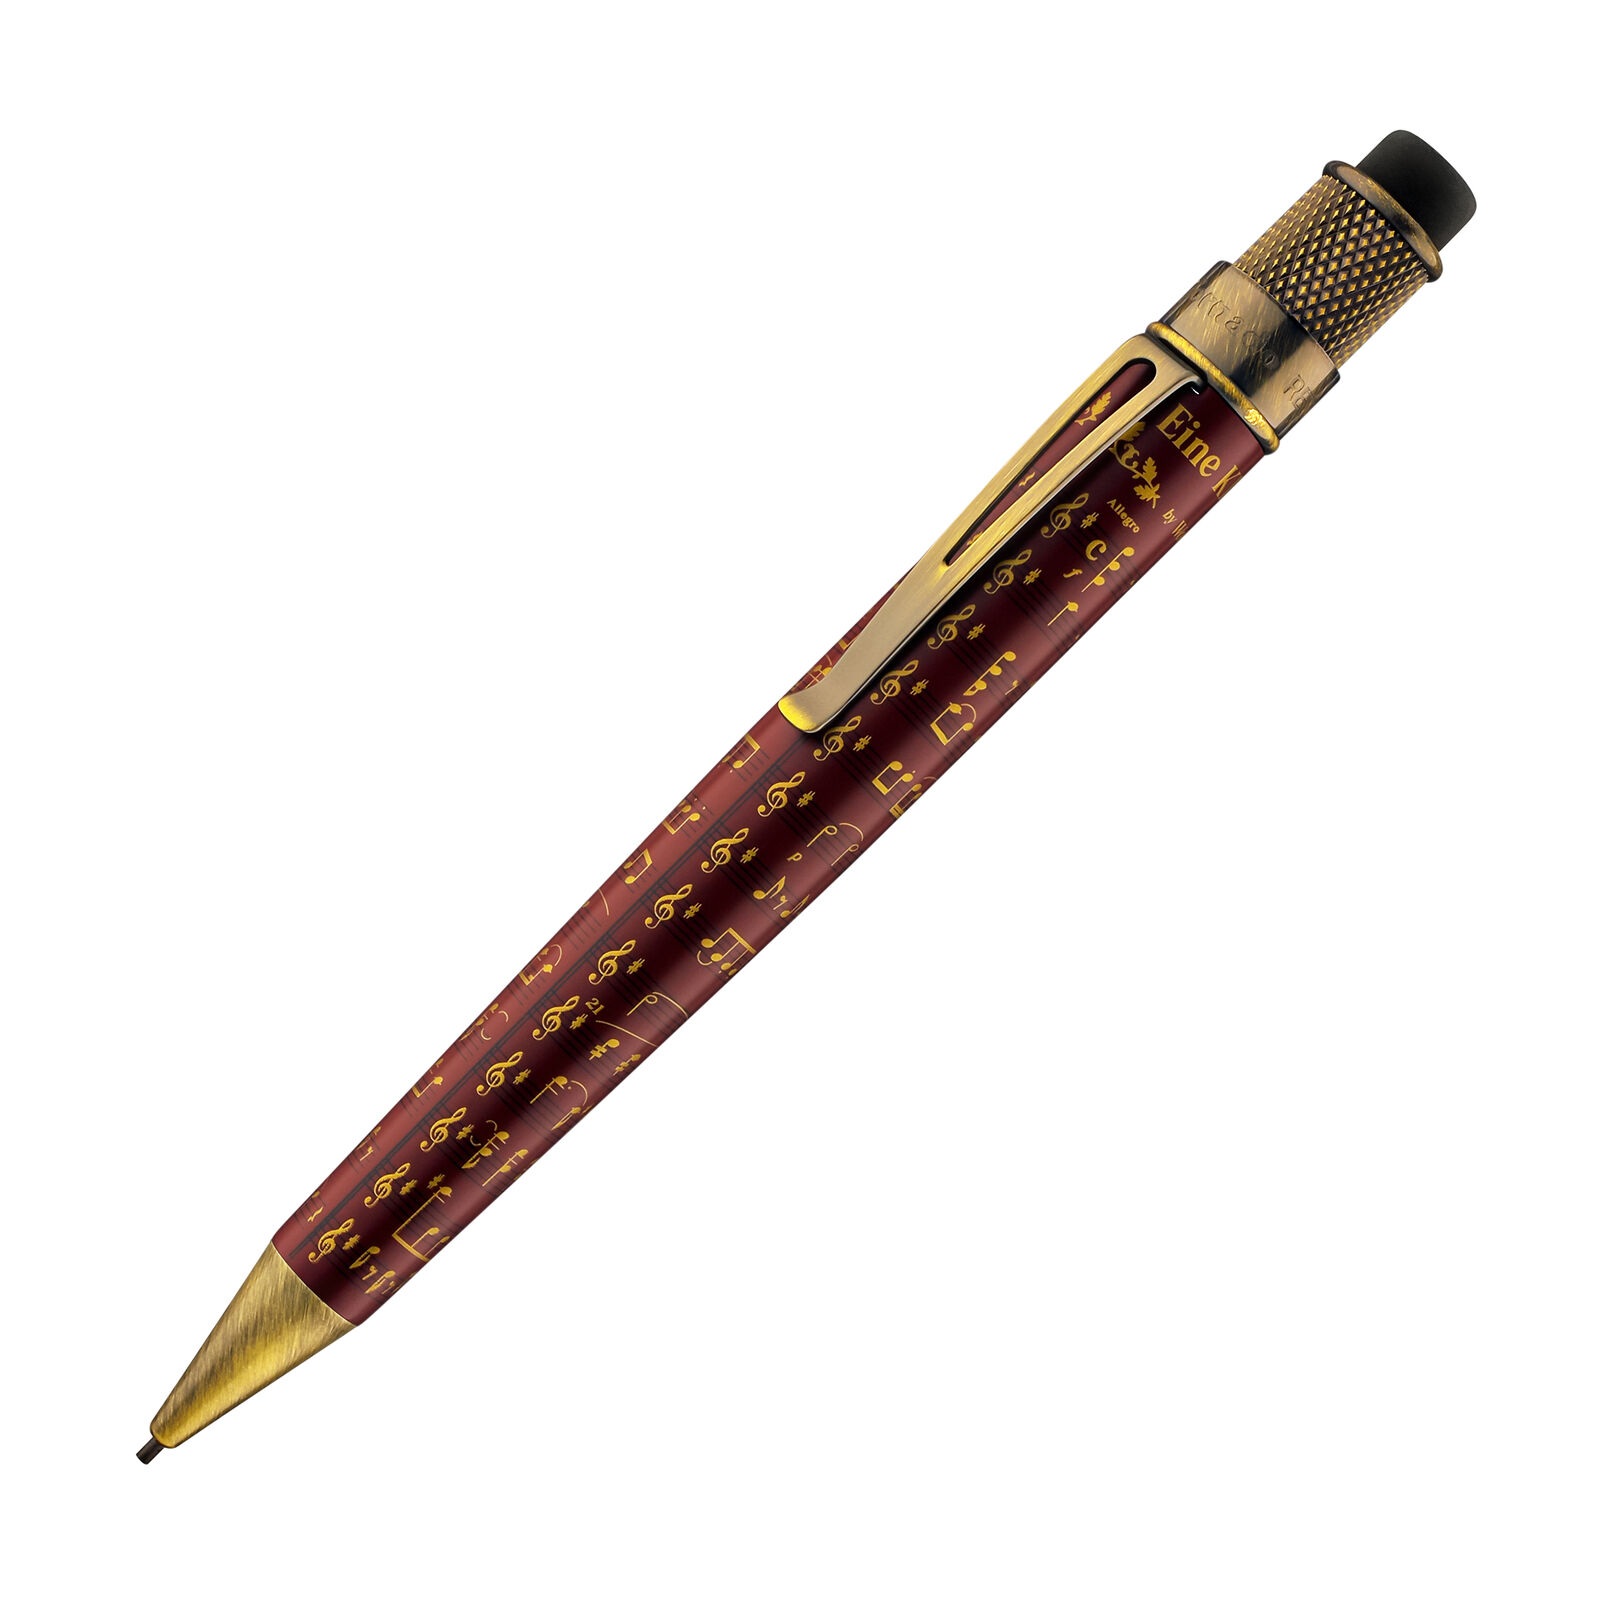 Retro 51 Tornado 1.1mm Pencil in Amadeus Limited Edition - NEW in Tube- ZRP-2134